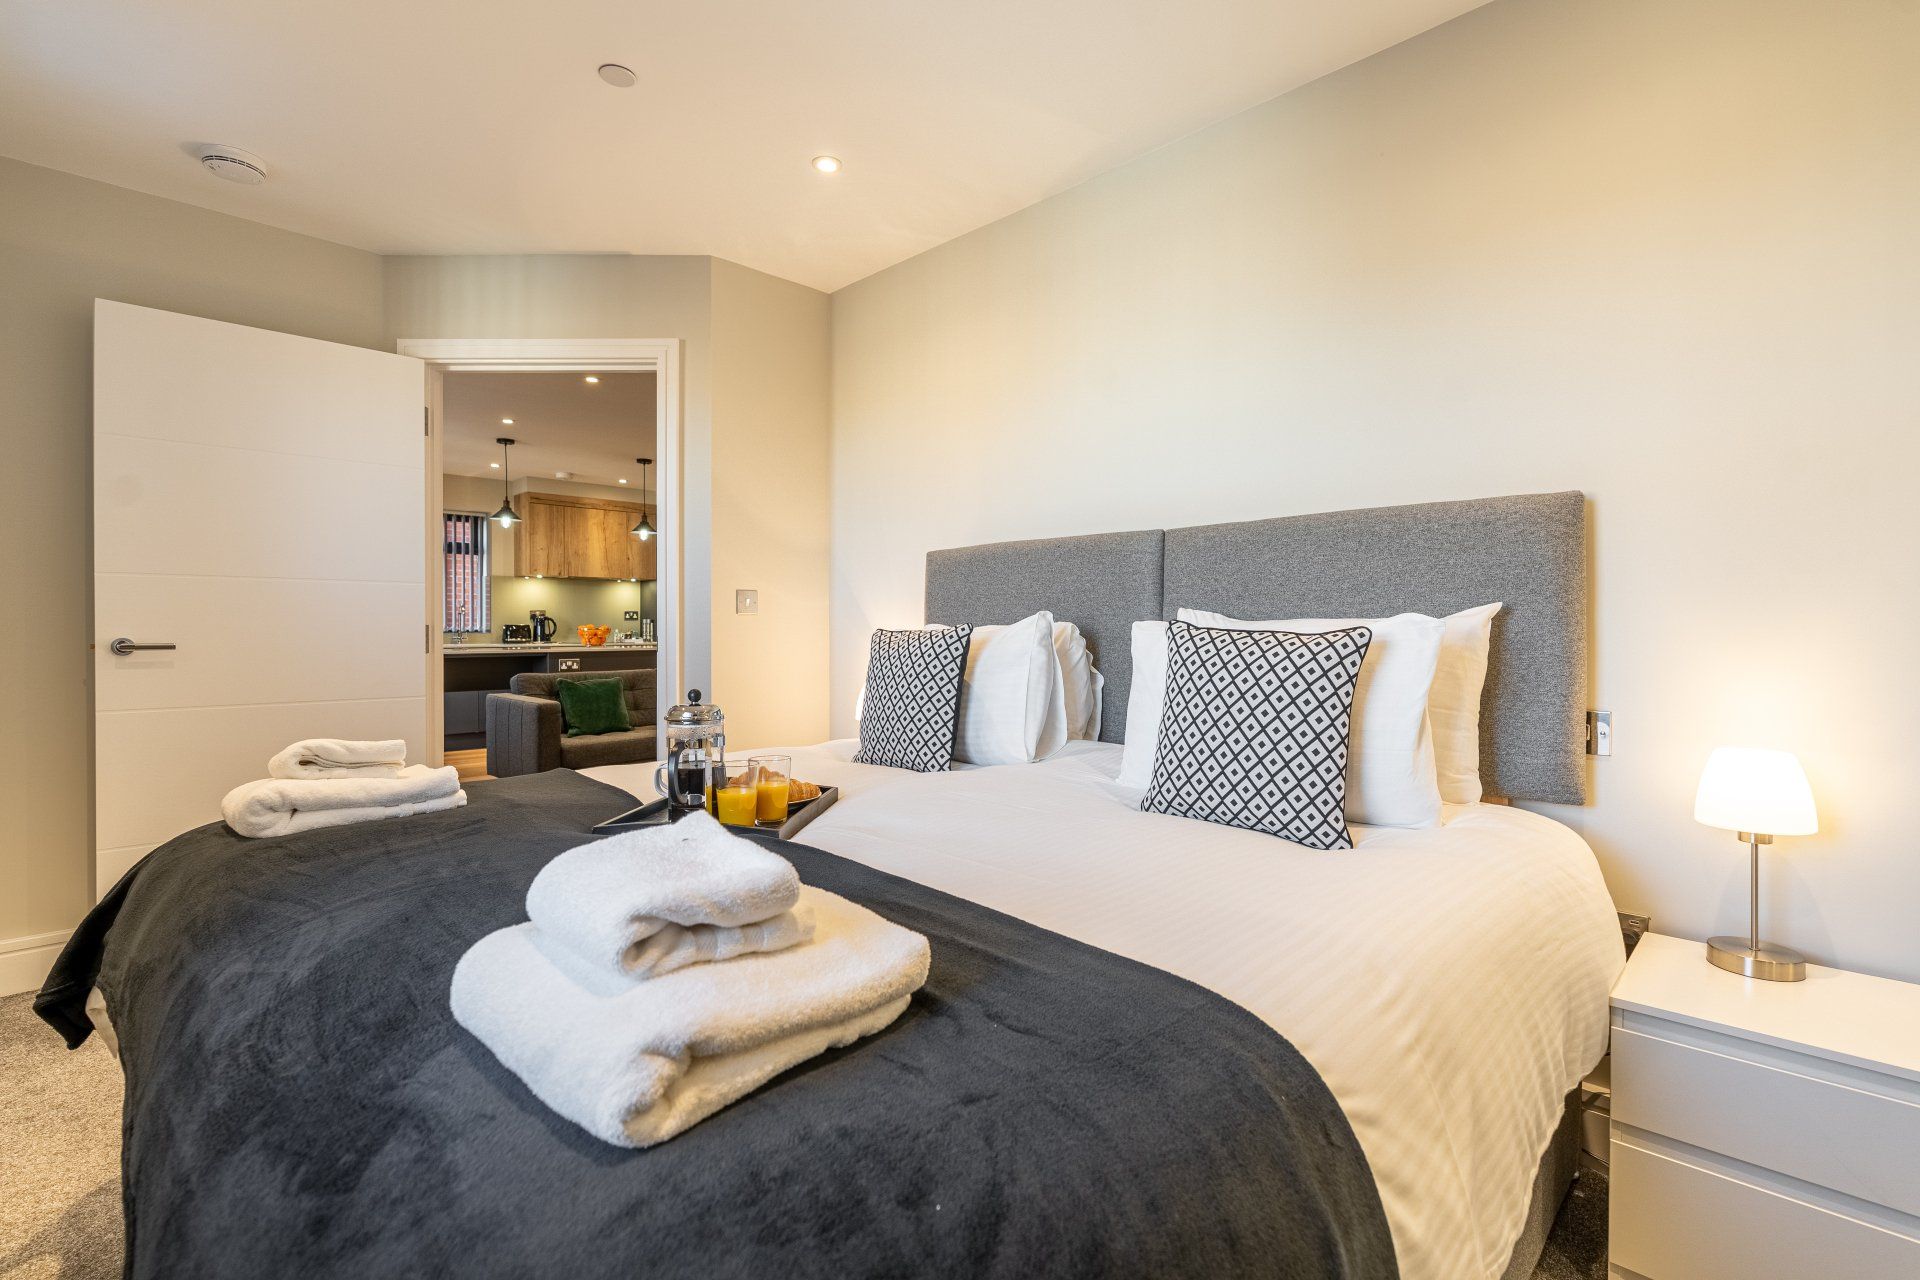 The Faculty Celador serviced apartment in Reading living room